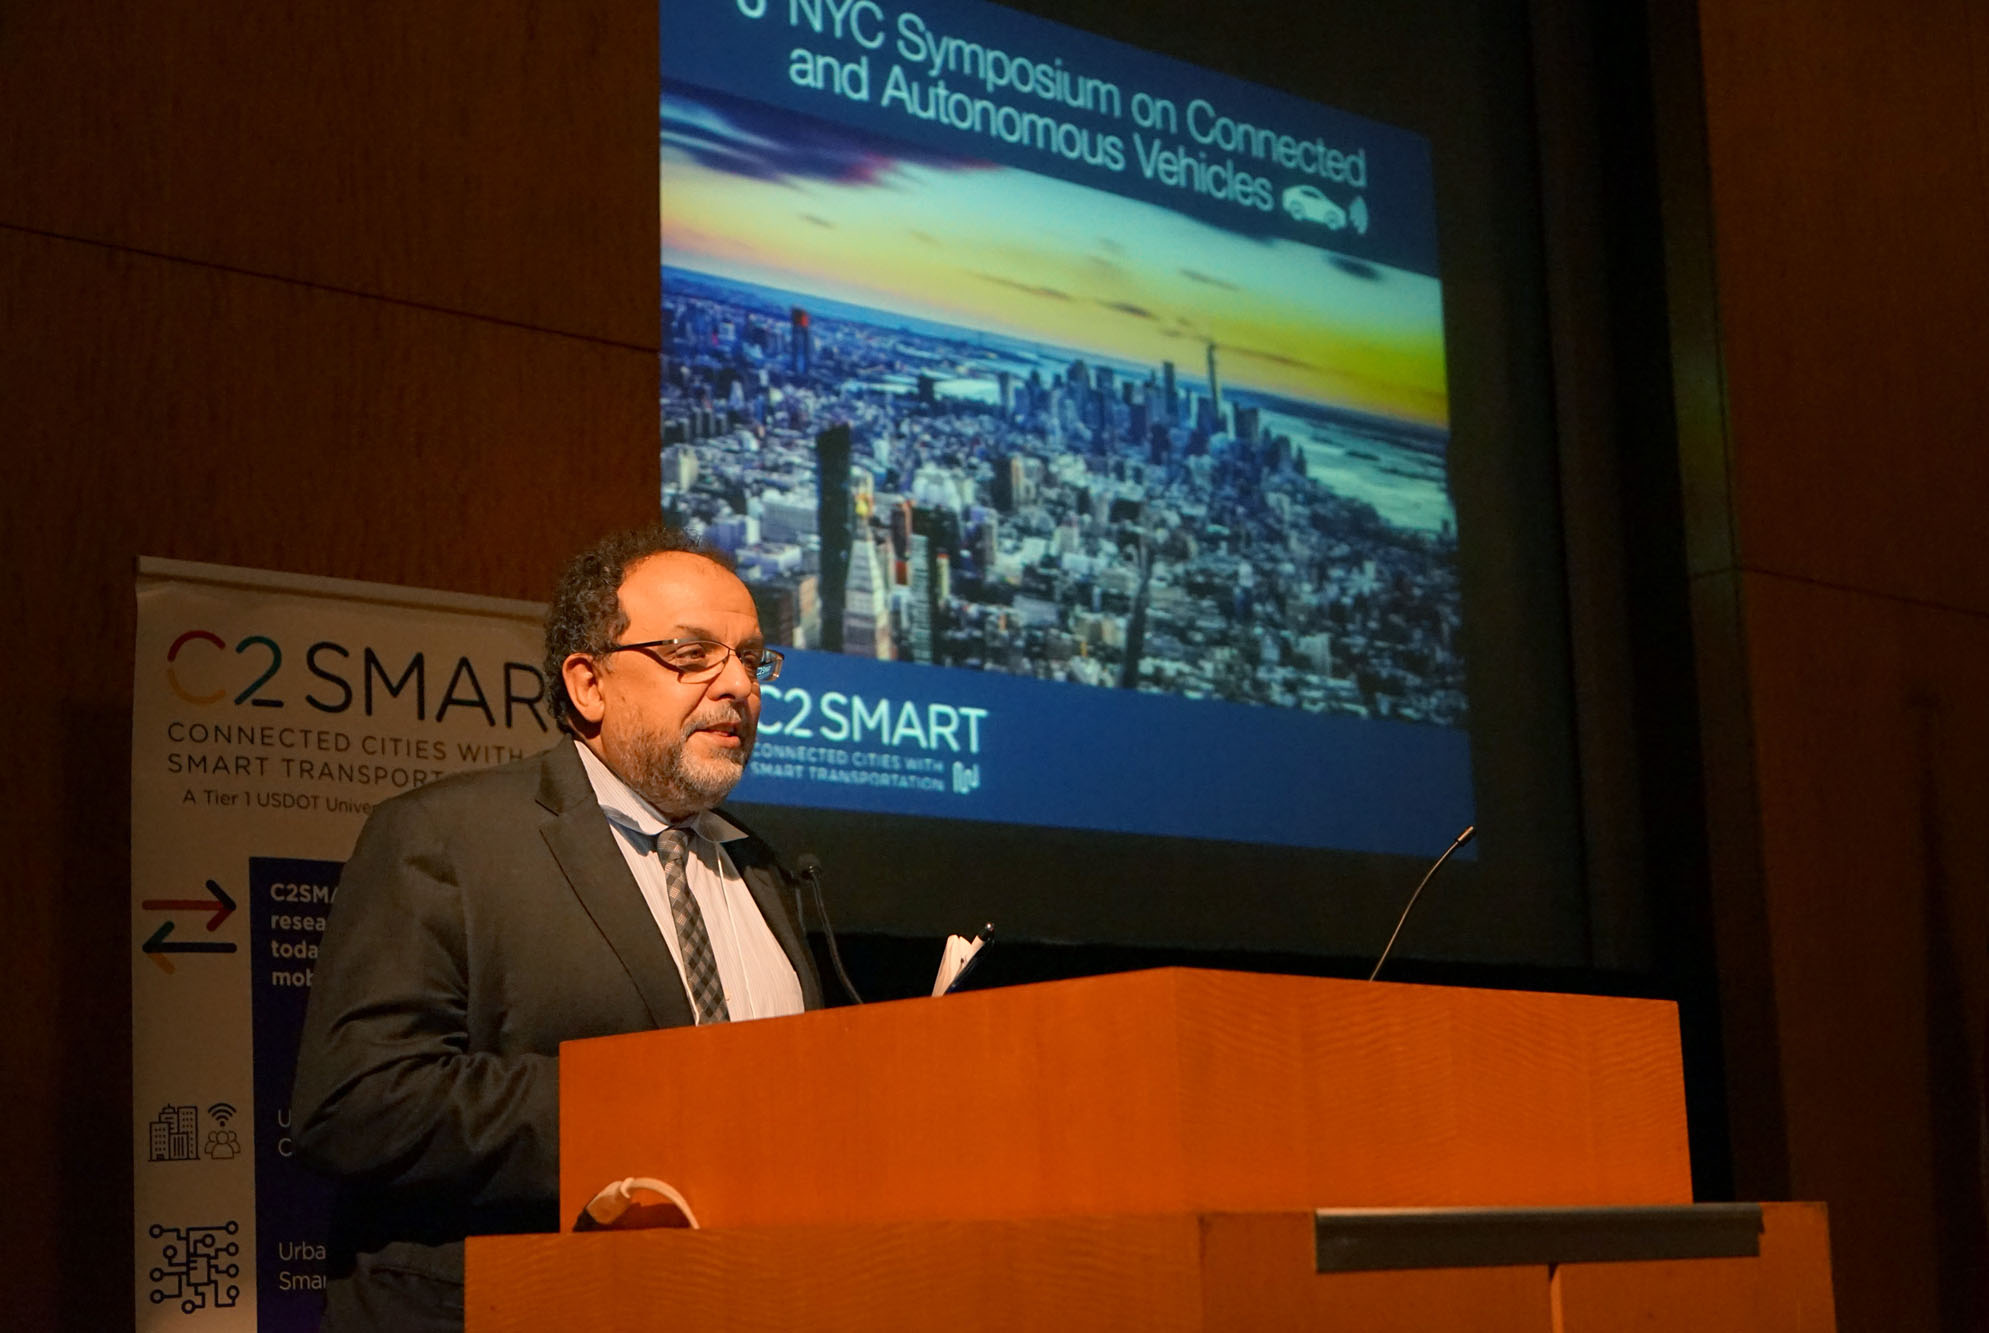 C2SMART Director Kaan Ozbay offers opening remarks at the start of the 6th NYC Symposium on Connected and Autonomous Vehicles